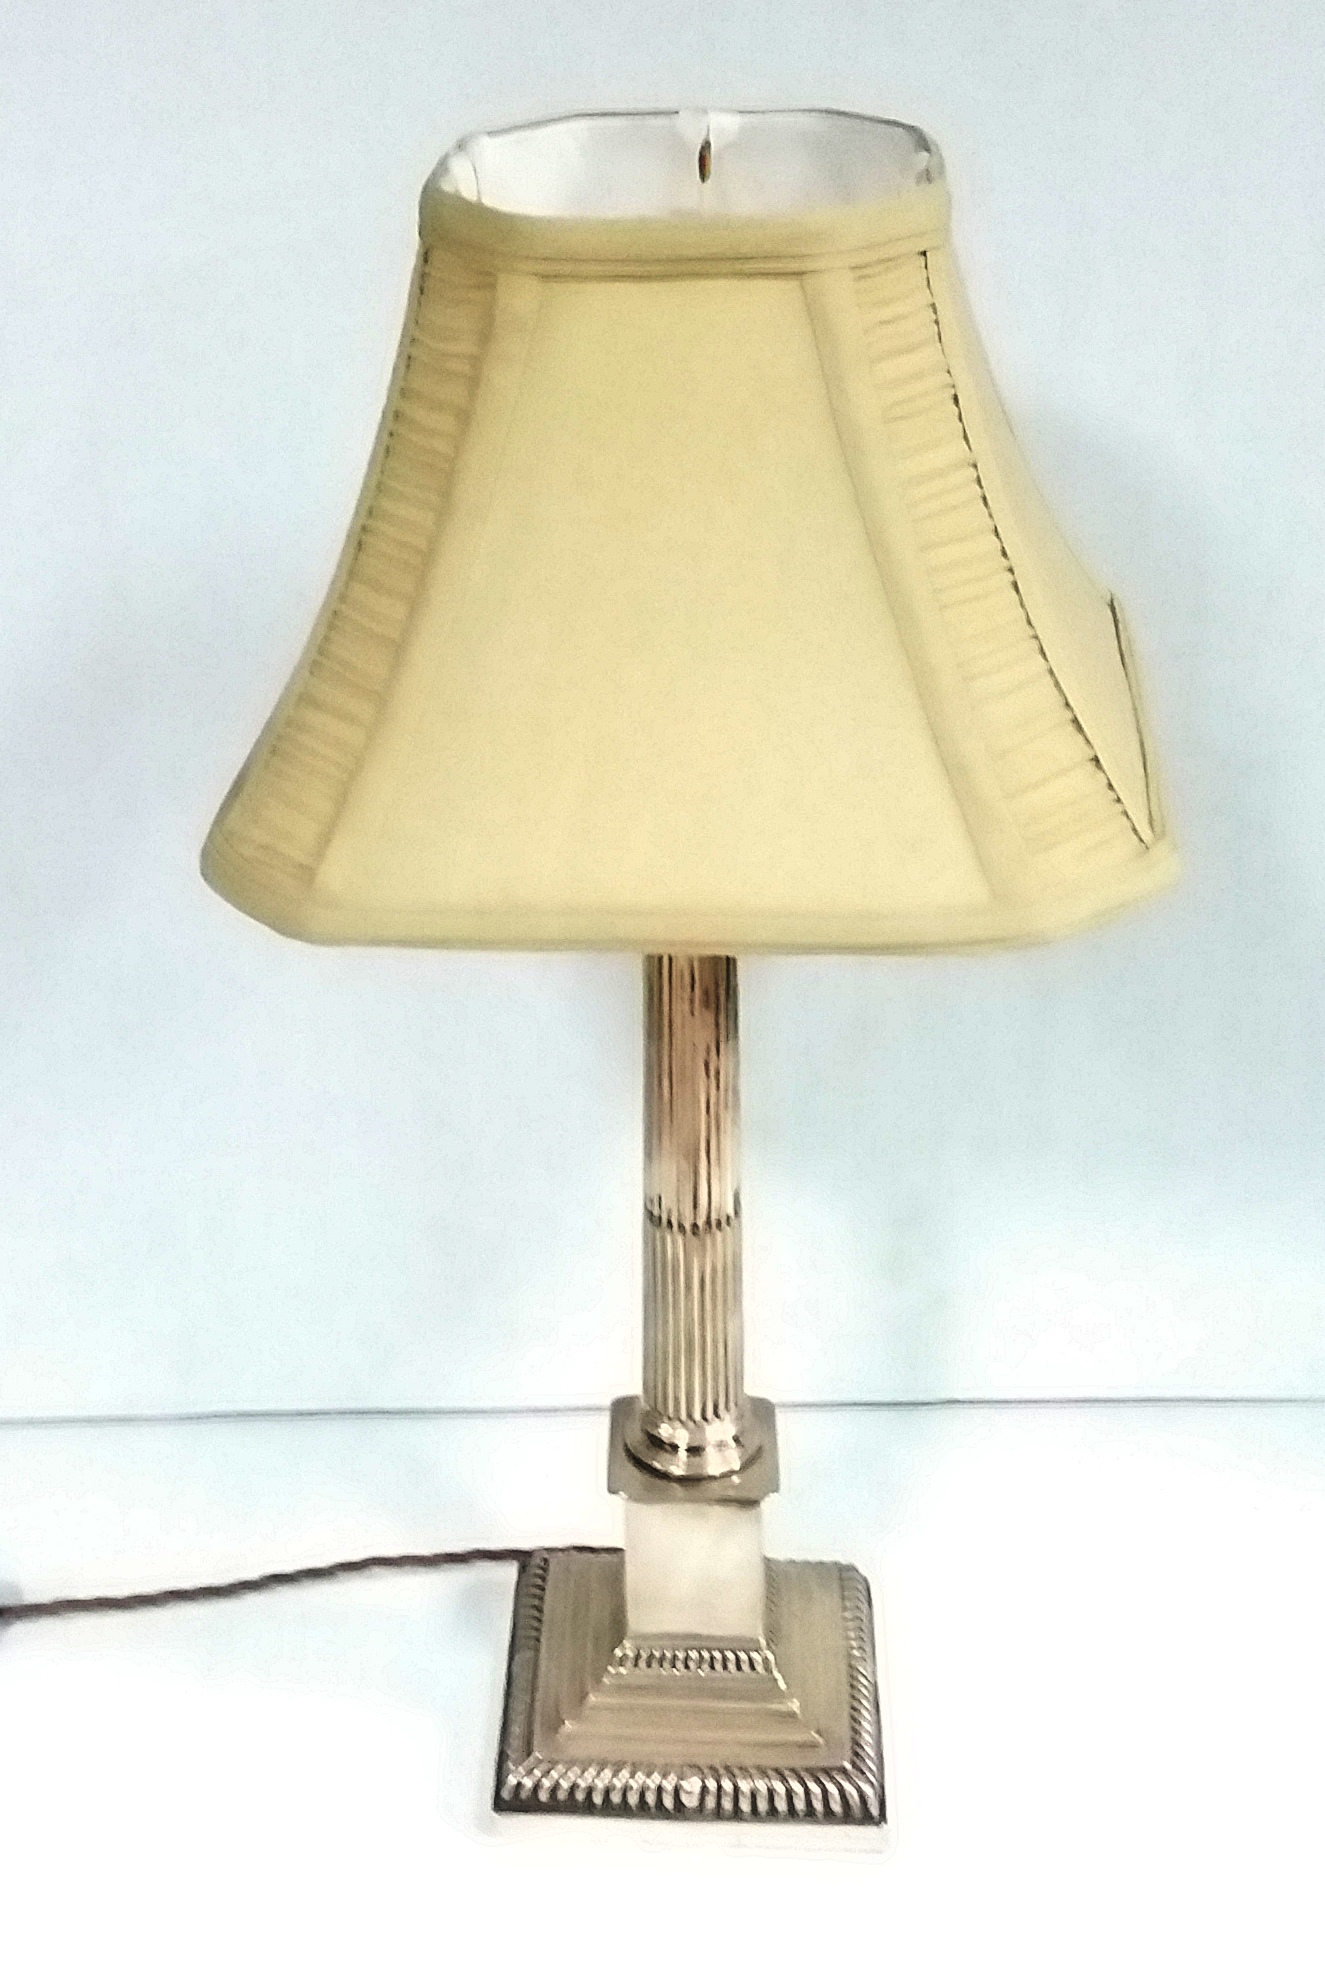 Vict Silver Plate Converted Table Lamp